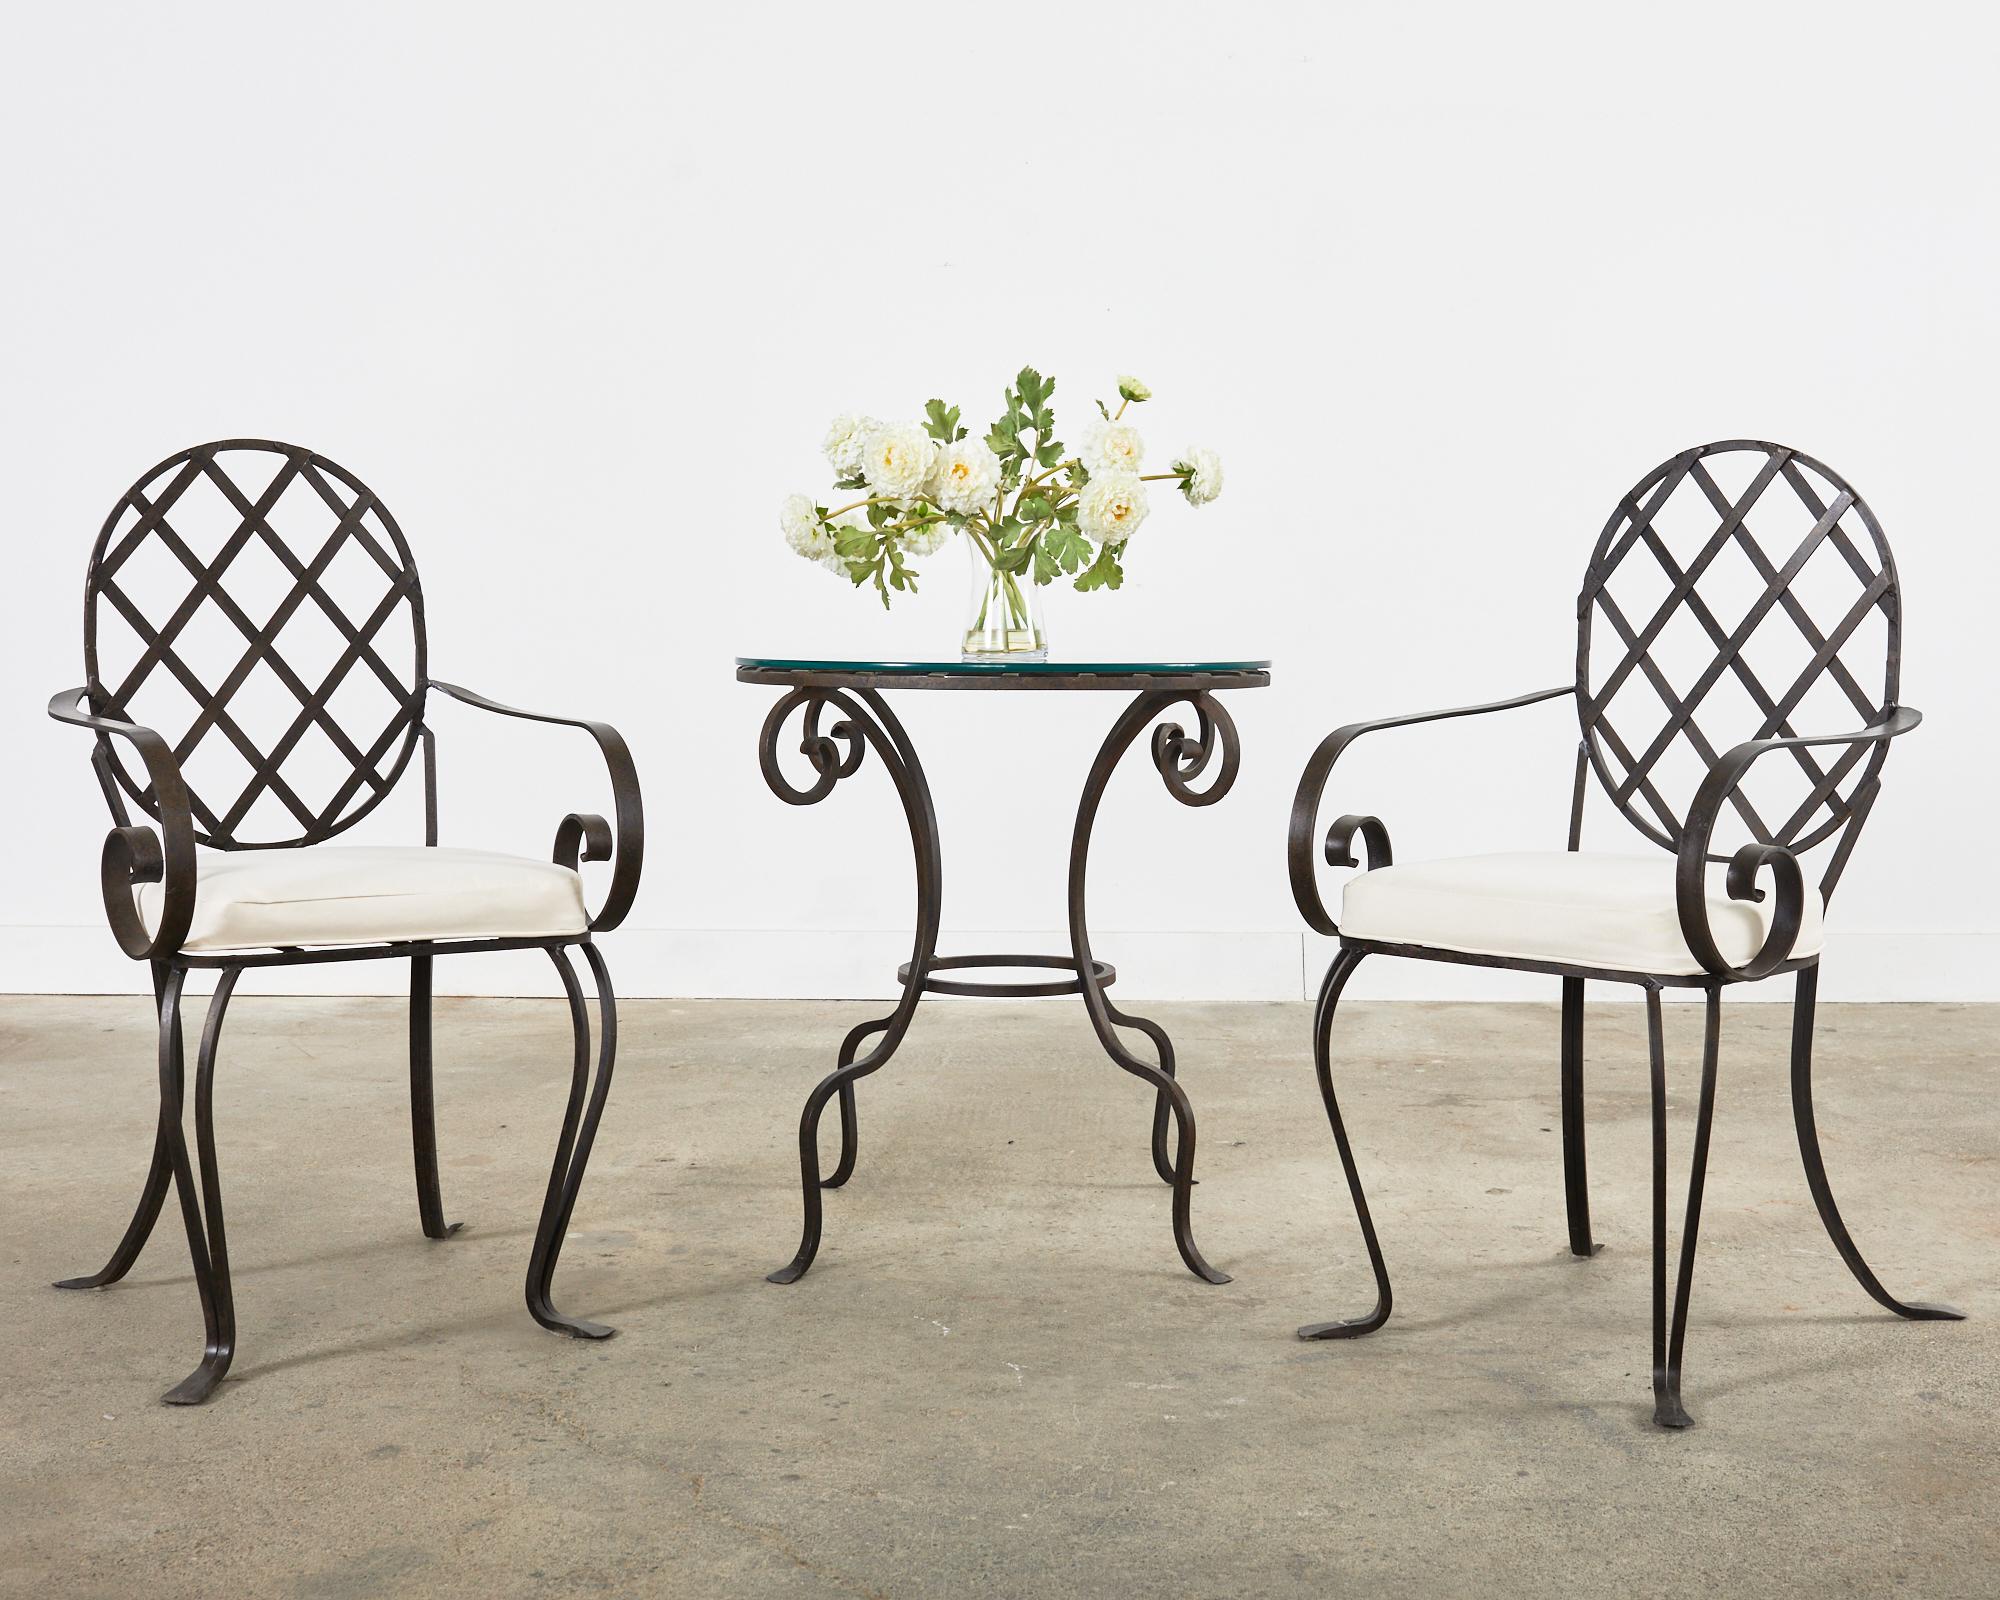 Charming patio and garden dining table featuring a wrought iron bar frame made in the style of Rose Tarlow. The bistro style table features a round top is supported by four gracefully curved legs with large scrolls on top and ending with flat feet.